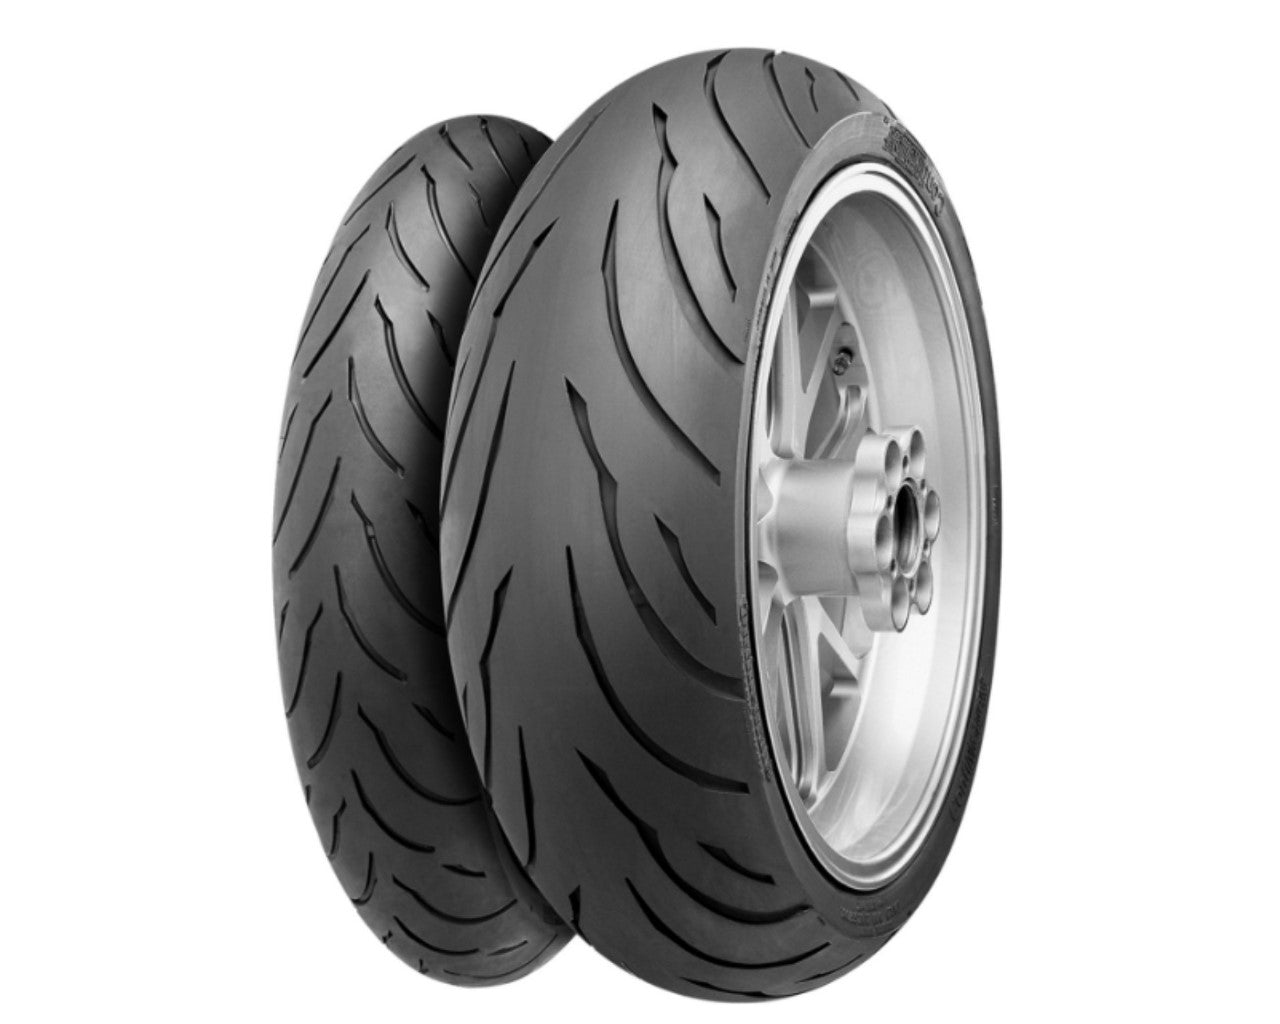 Continental 120/70ZR17 Motion Street Motorcycle Front Motorcycle Tire 0301-0134